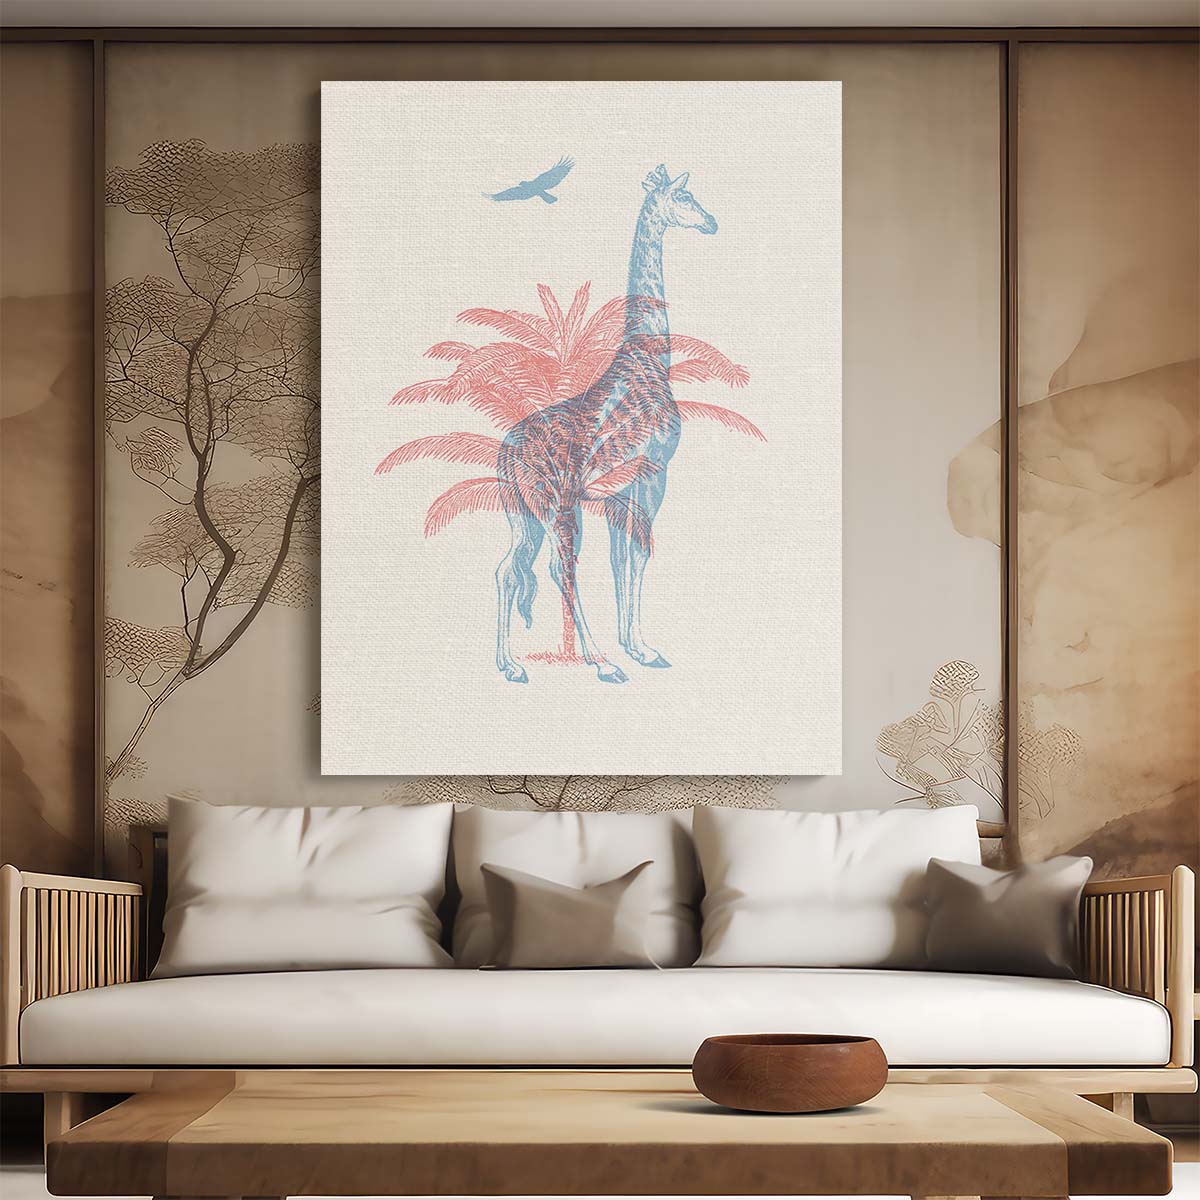 Tropical Giraffe Illustration Art with Palm Trees, Exotic Birds by Luxuriance Designs, made in USA